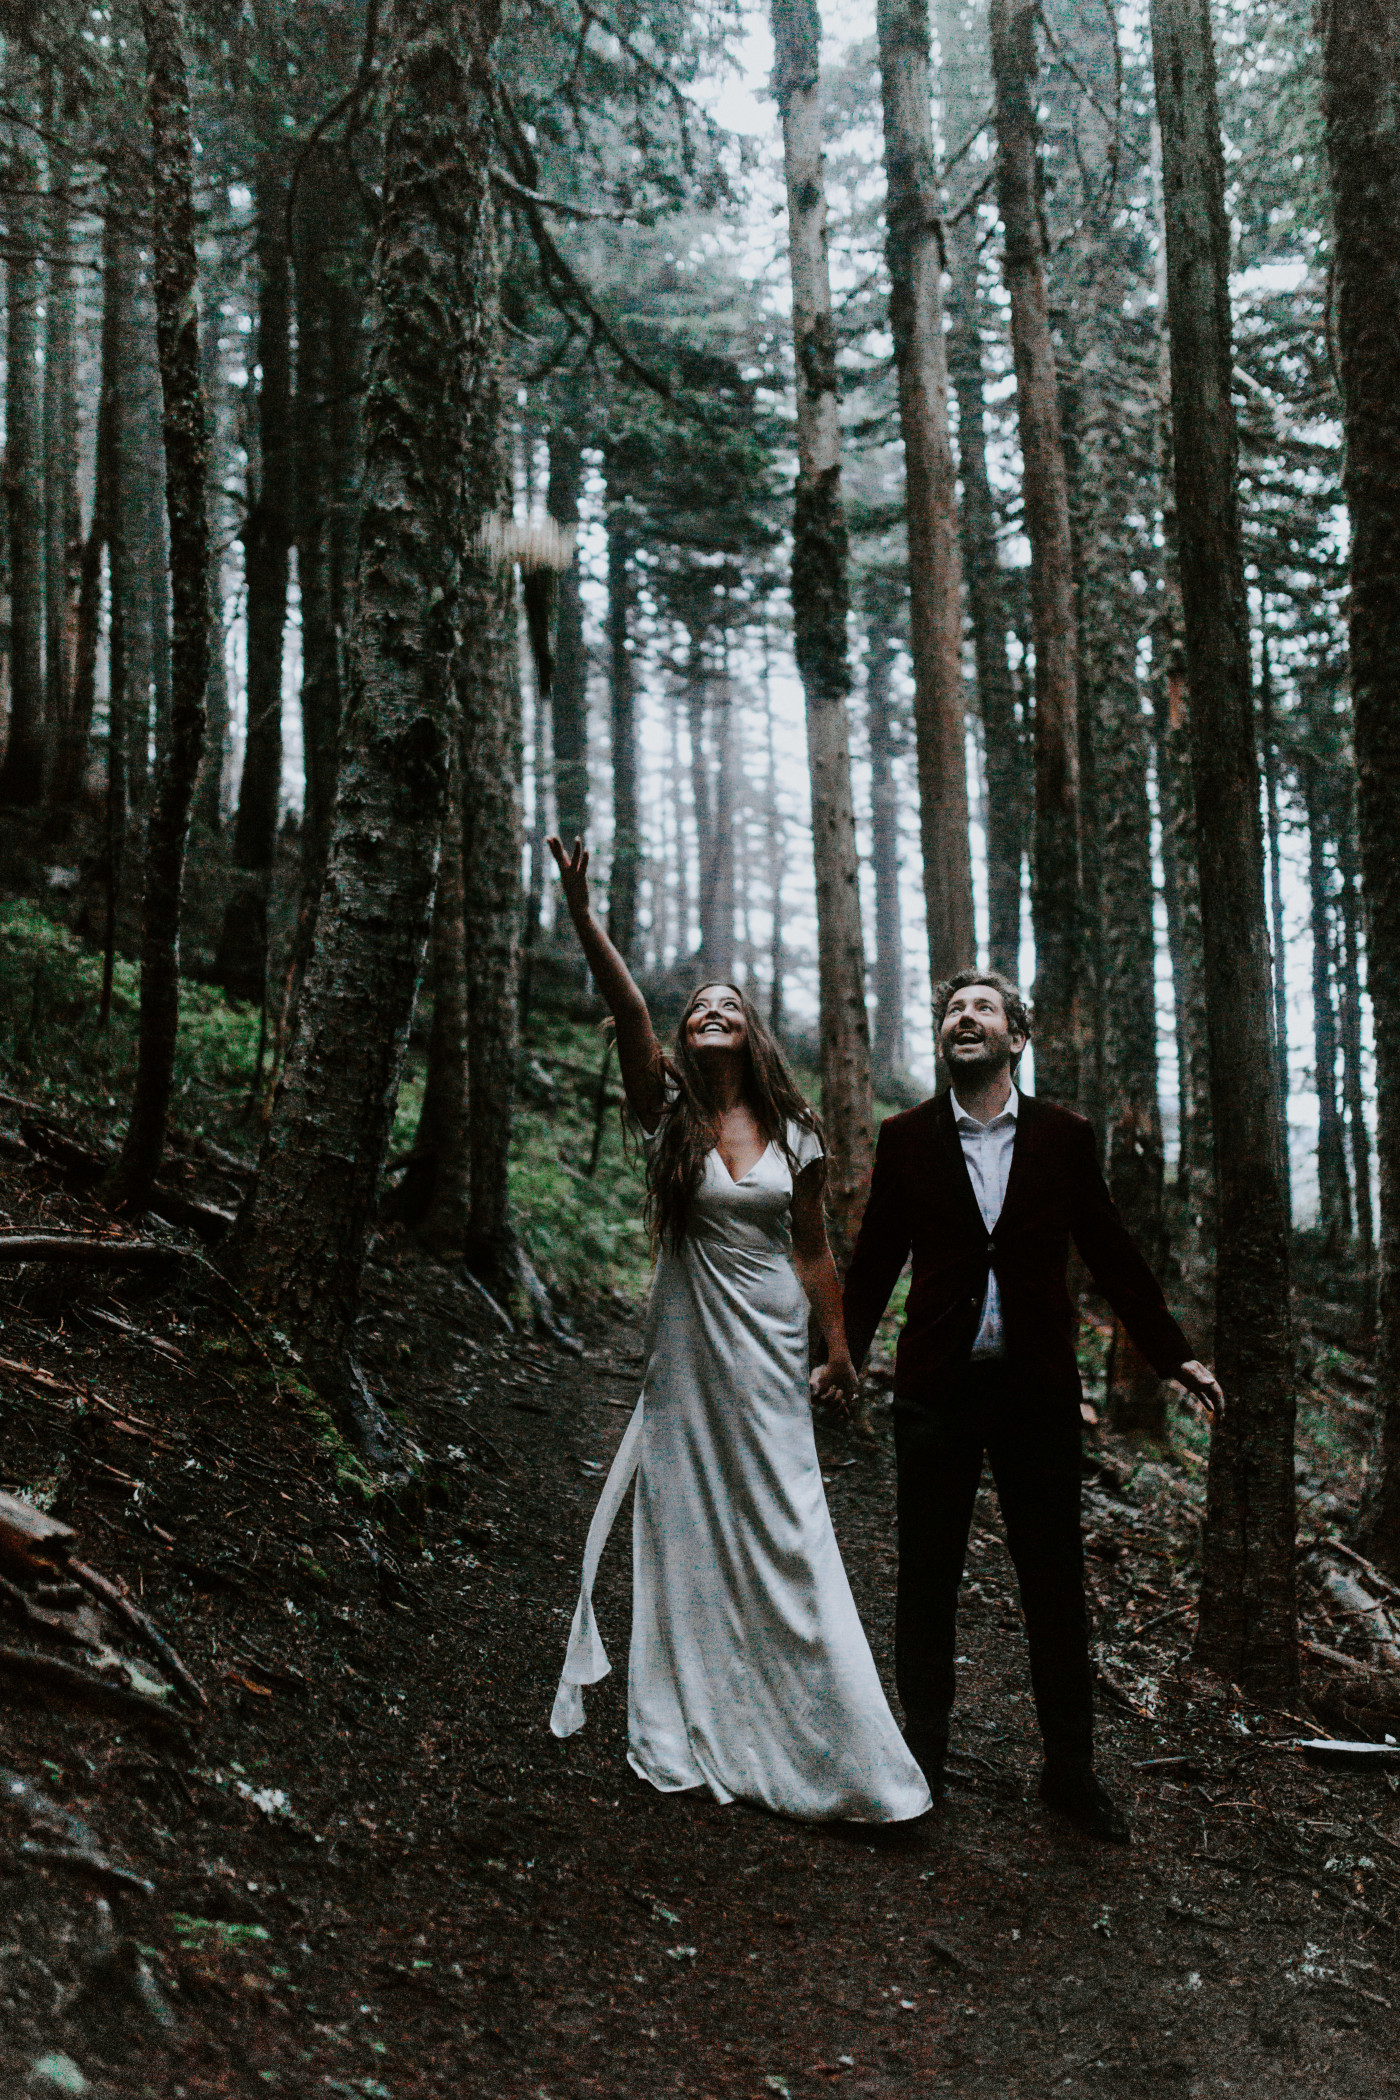 Katelyn throws her bouquet while holding hands with Murray. Elopement wedding photography at Mount Hood by Sienna Plus Josh.